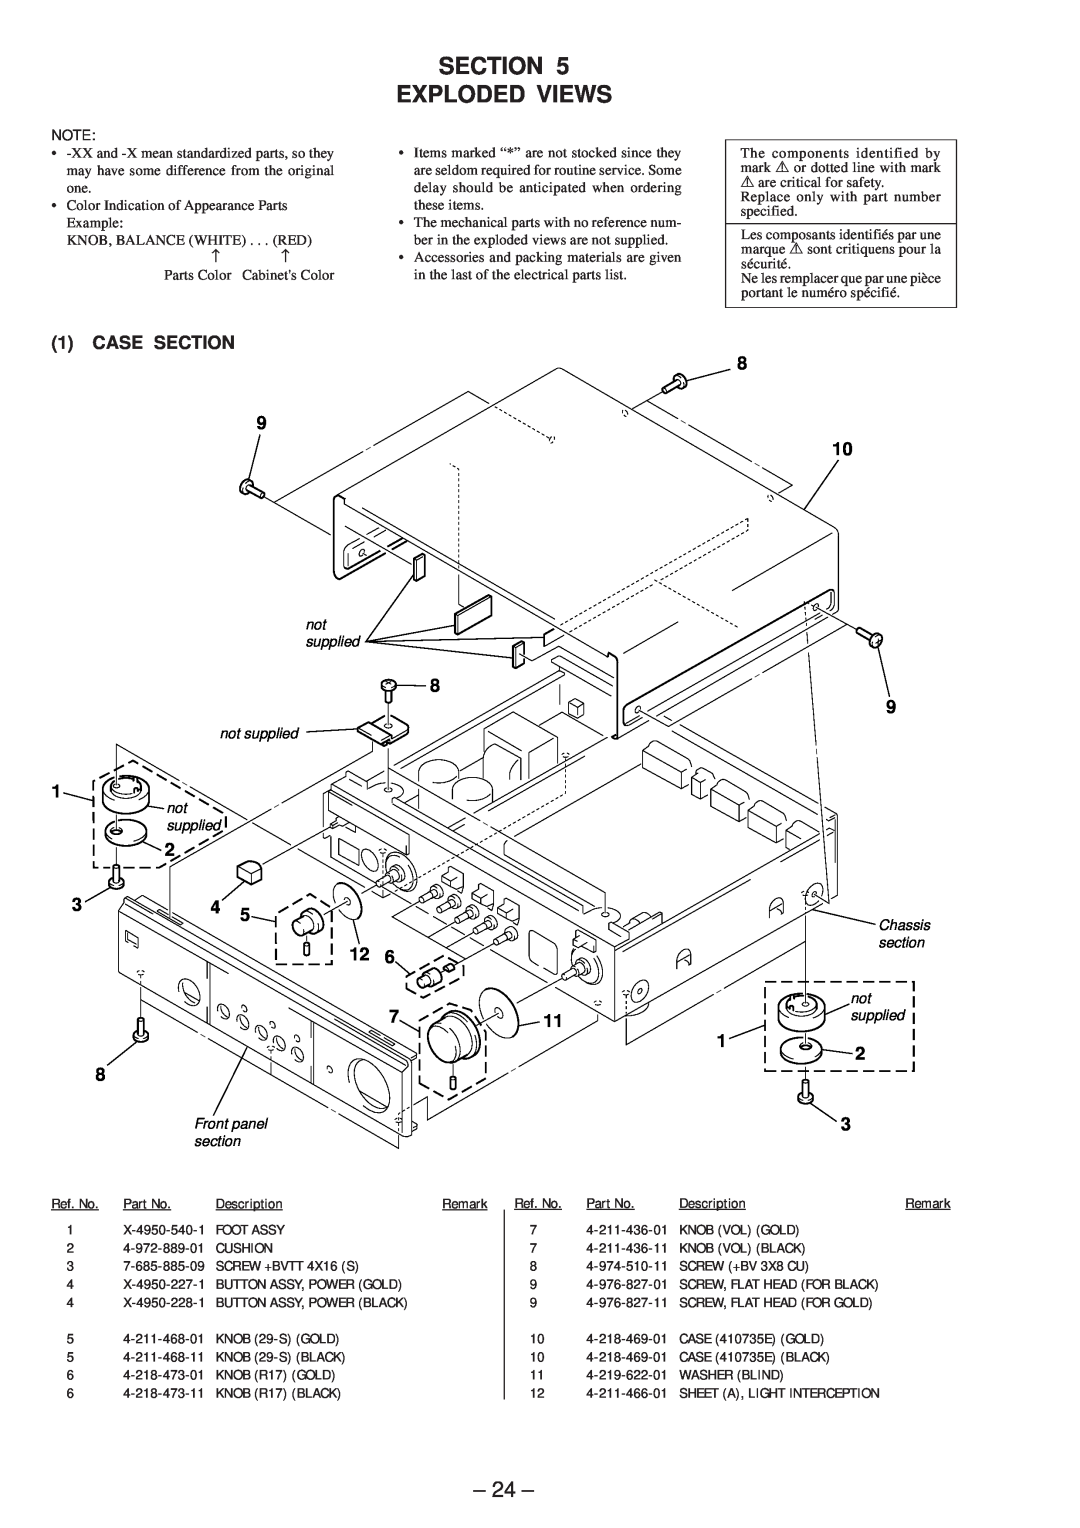 Sony TA-P9000ES service manual Section Exploded Views, 1CASE SECTION 